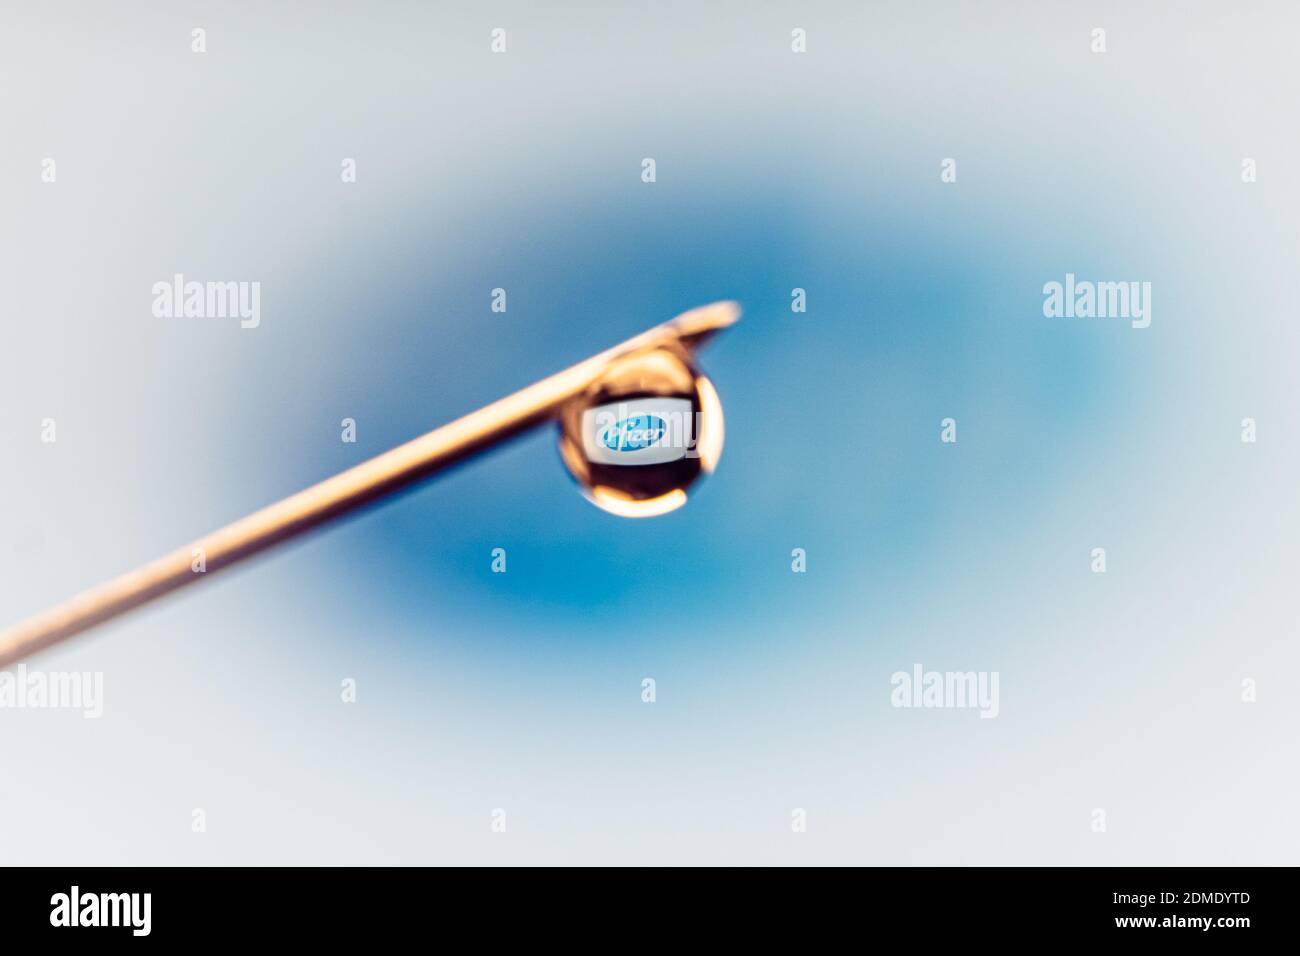 Izmir, Turkey - December 17 2020: Coronavirus vaccine concept and background. New vaccine pfizer and biontech isolated on blue background. Covid-19, 2 Stock Photo